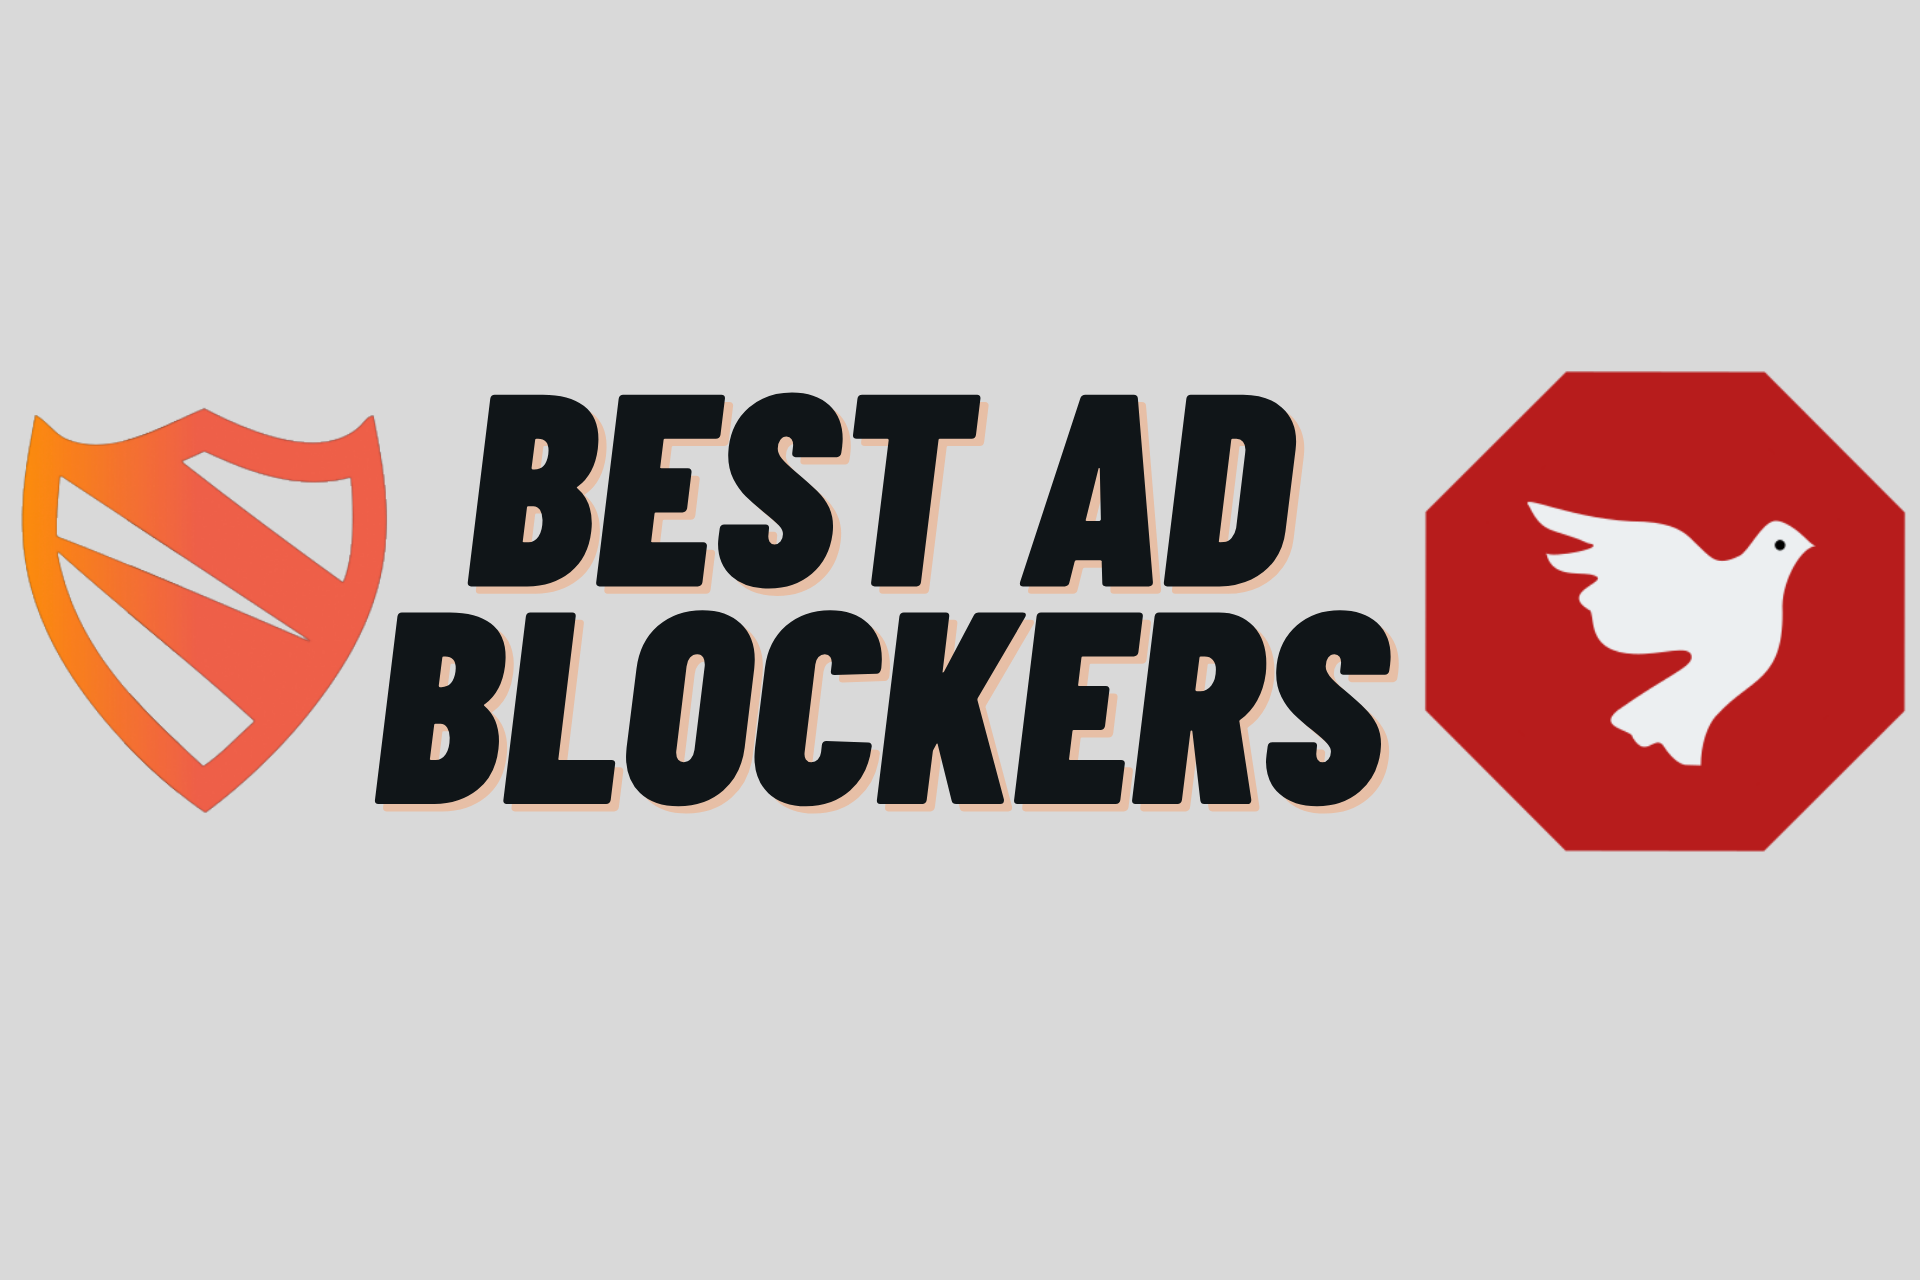 Best Ad blockers for Android: How to block ads?